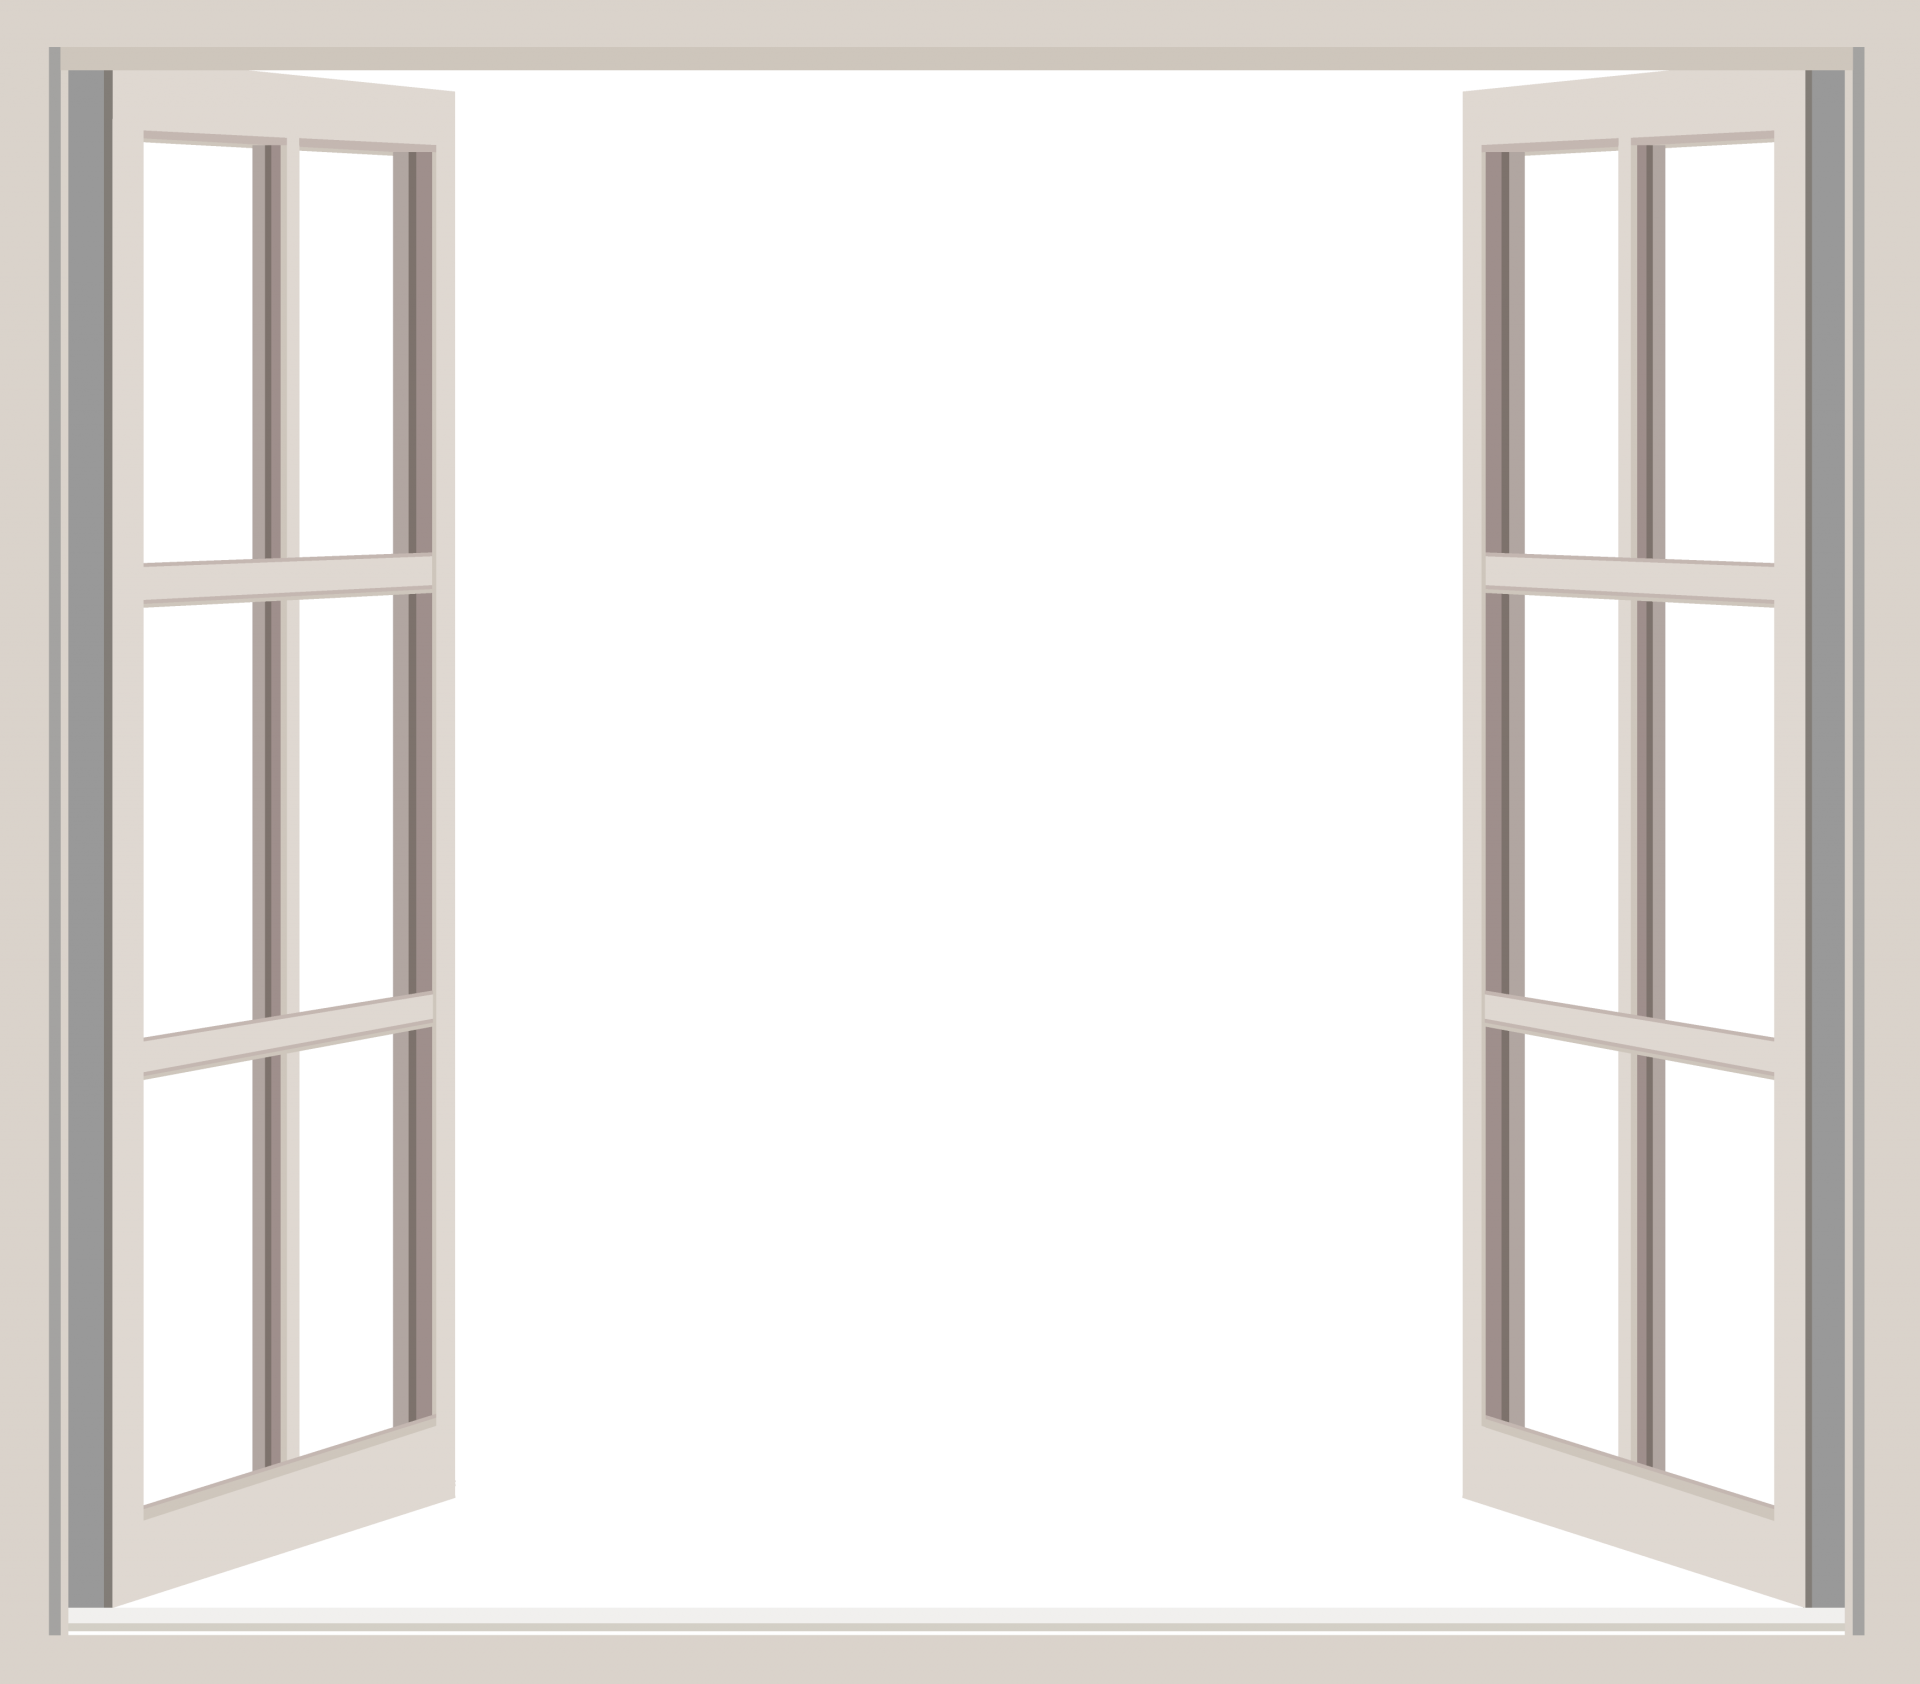 Open window frame on transparent background so you can easily add your own image